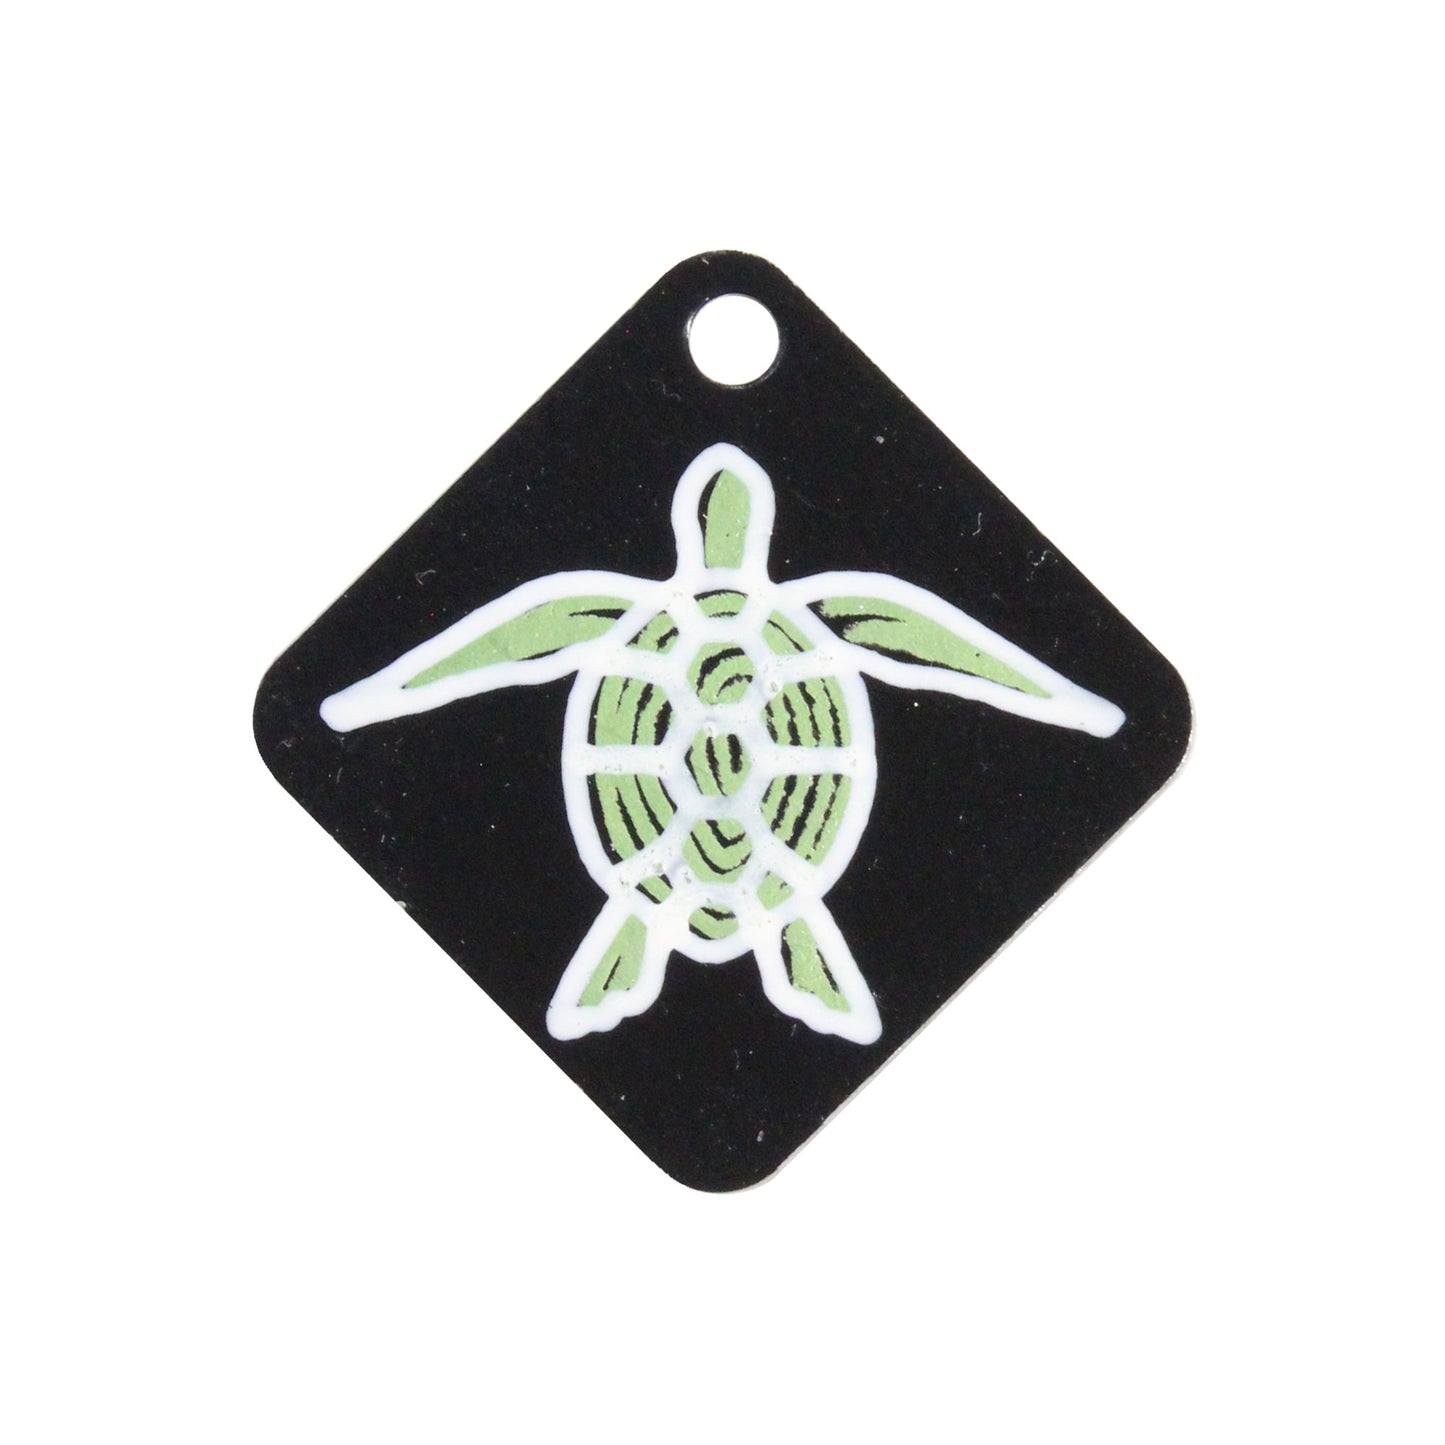 SEA TURTLE CHARM / green and white silhouette / printed on aluminum